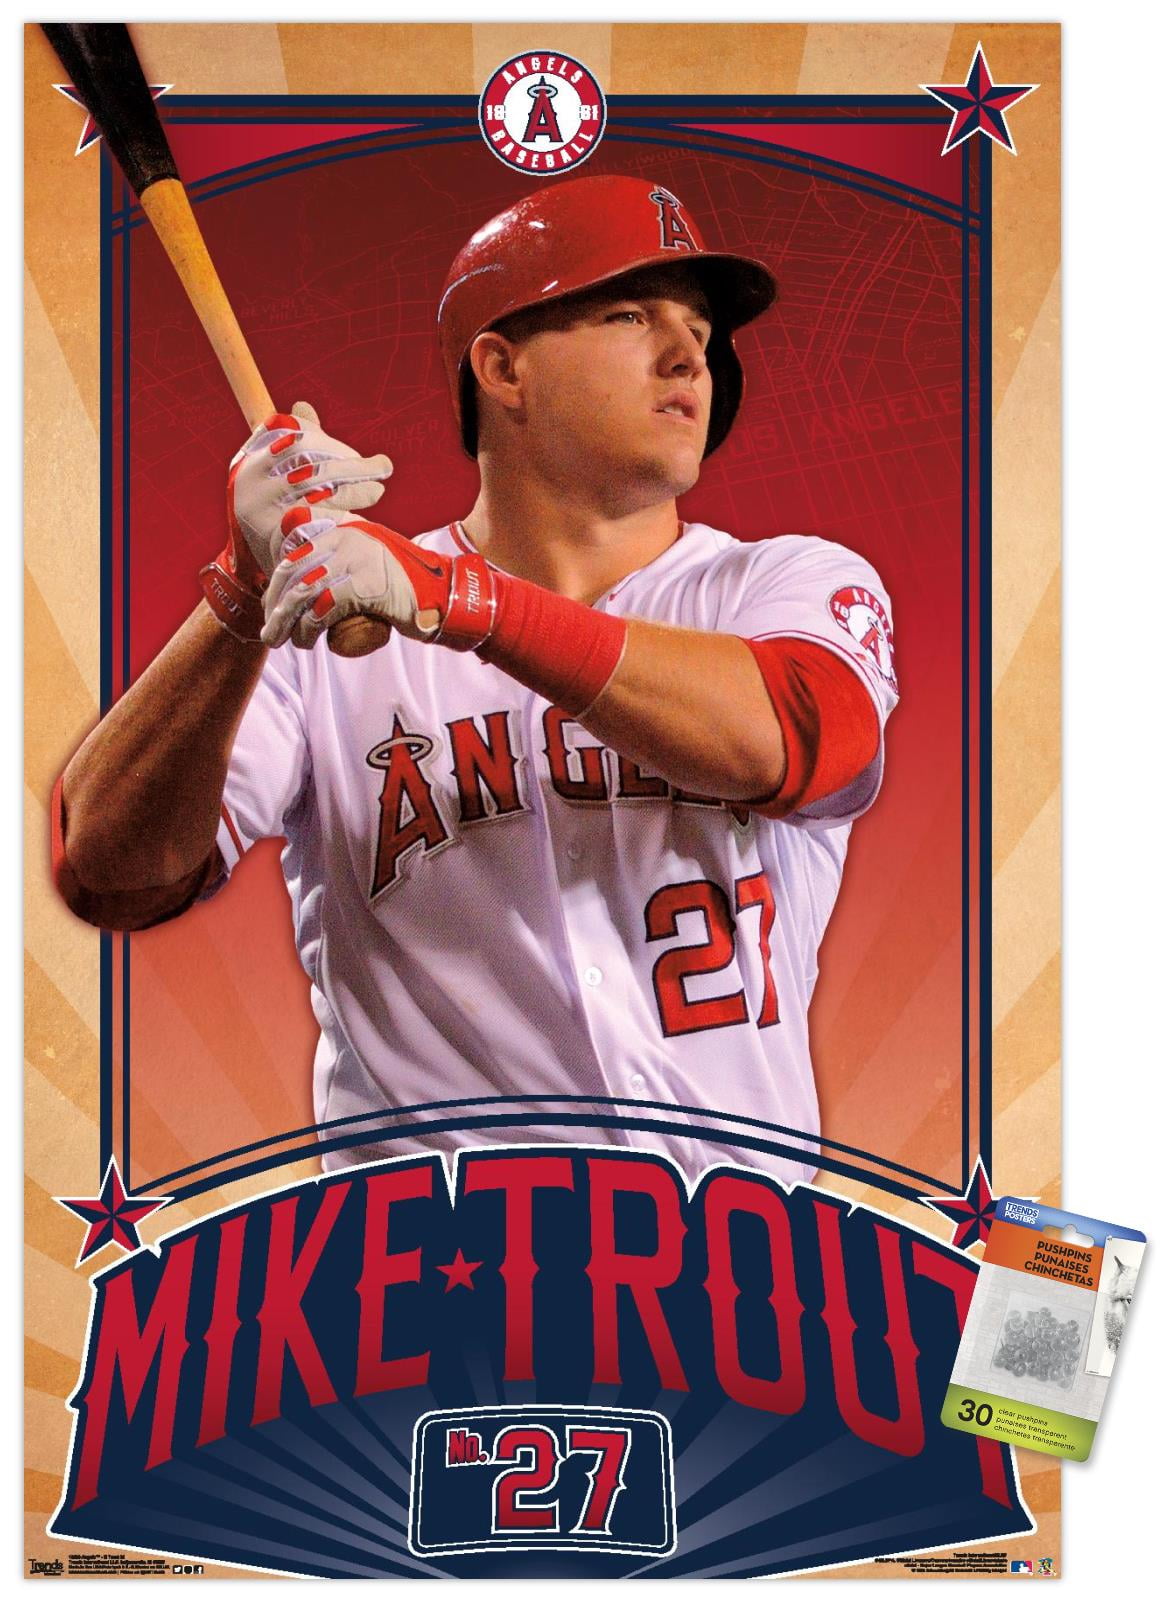  Mike Trout Baseball Posters for Wall Home Run Poster for Boys  Bedroom Painting Wall Decor Signed Posters Unframe-style  16x24inch(40x60cm): Posters & Prints